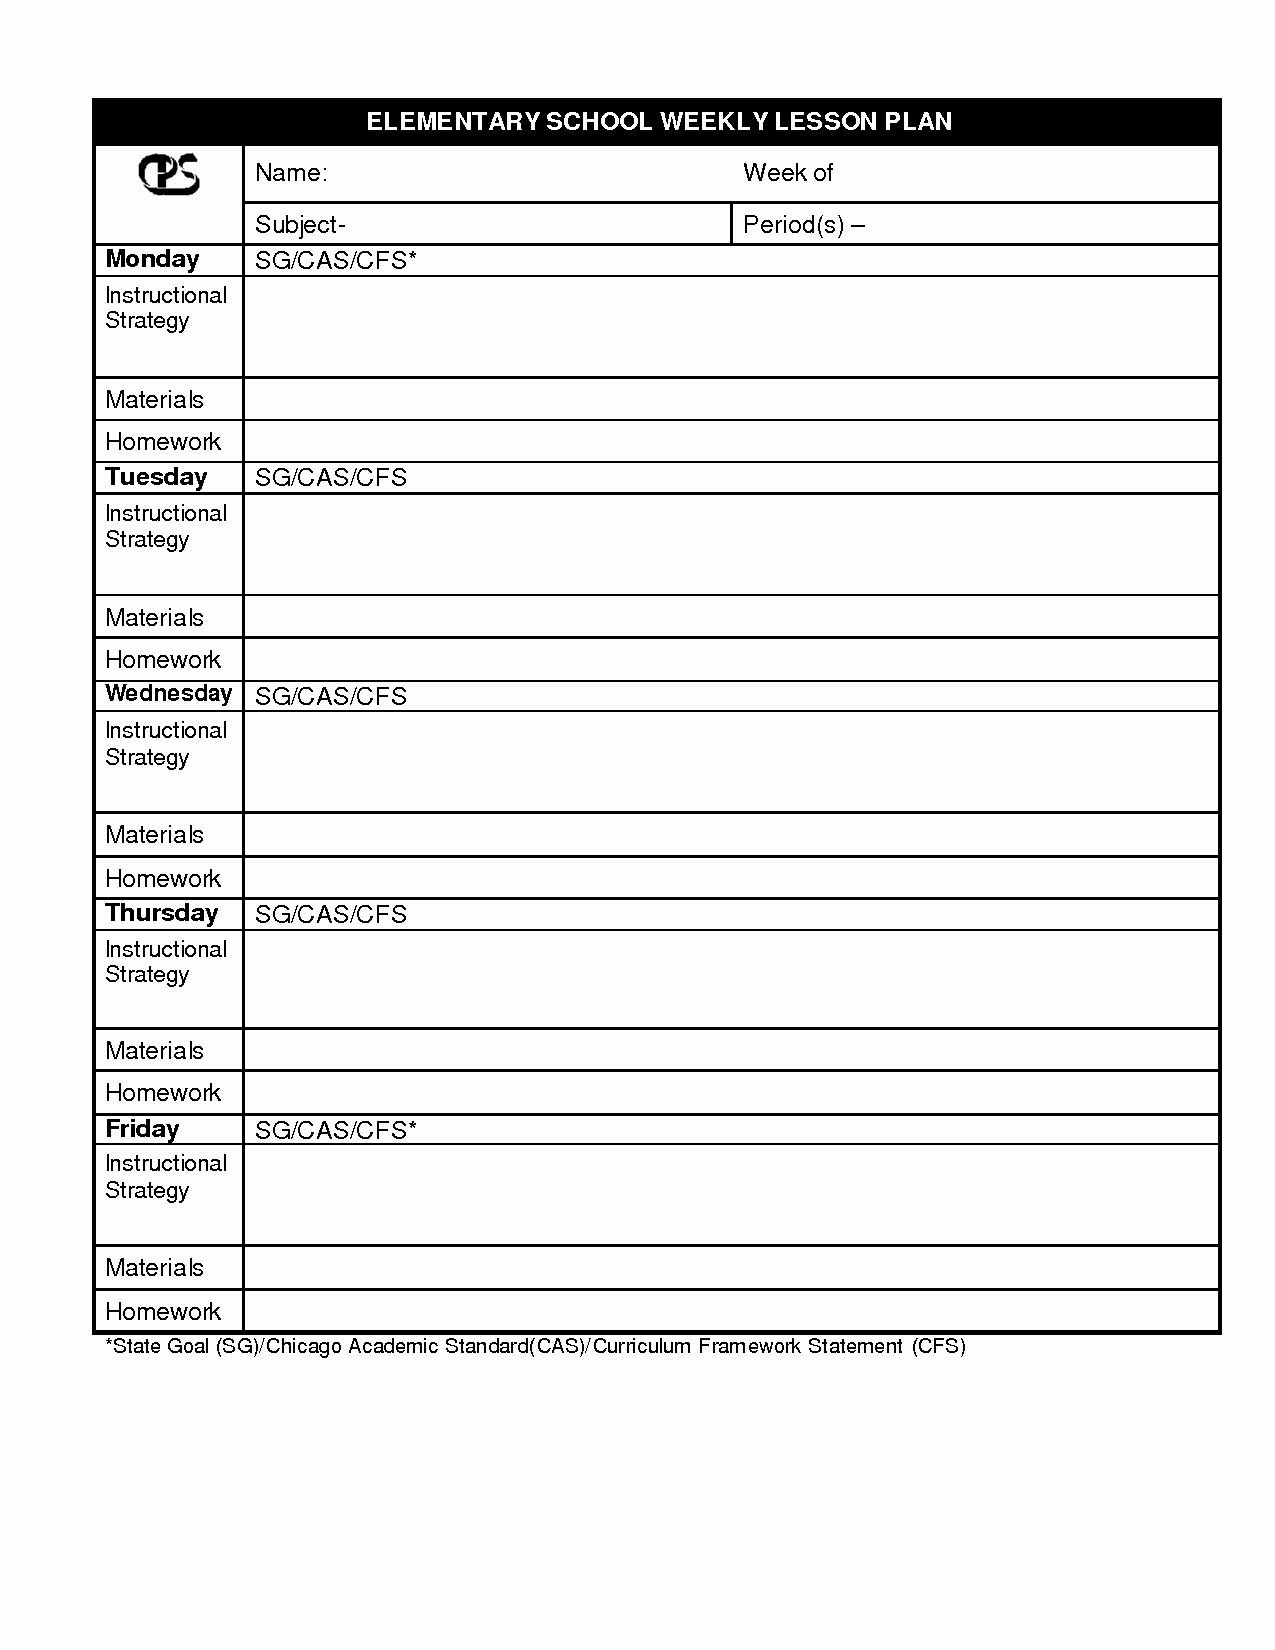 Pe Lesson Plan Template 30 Free Lesson Plan Template Elementary In 2020